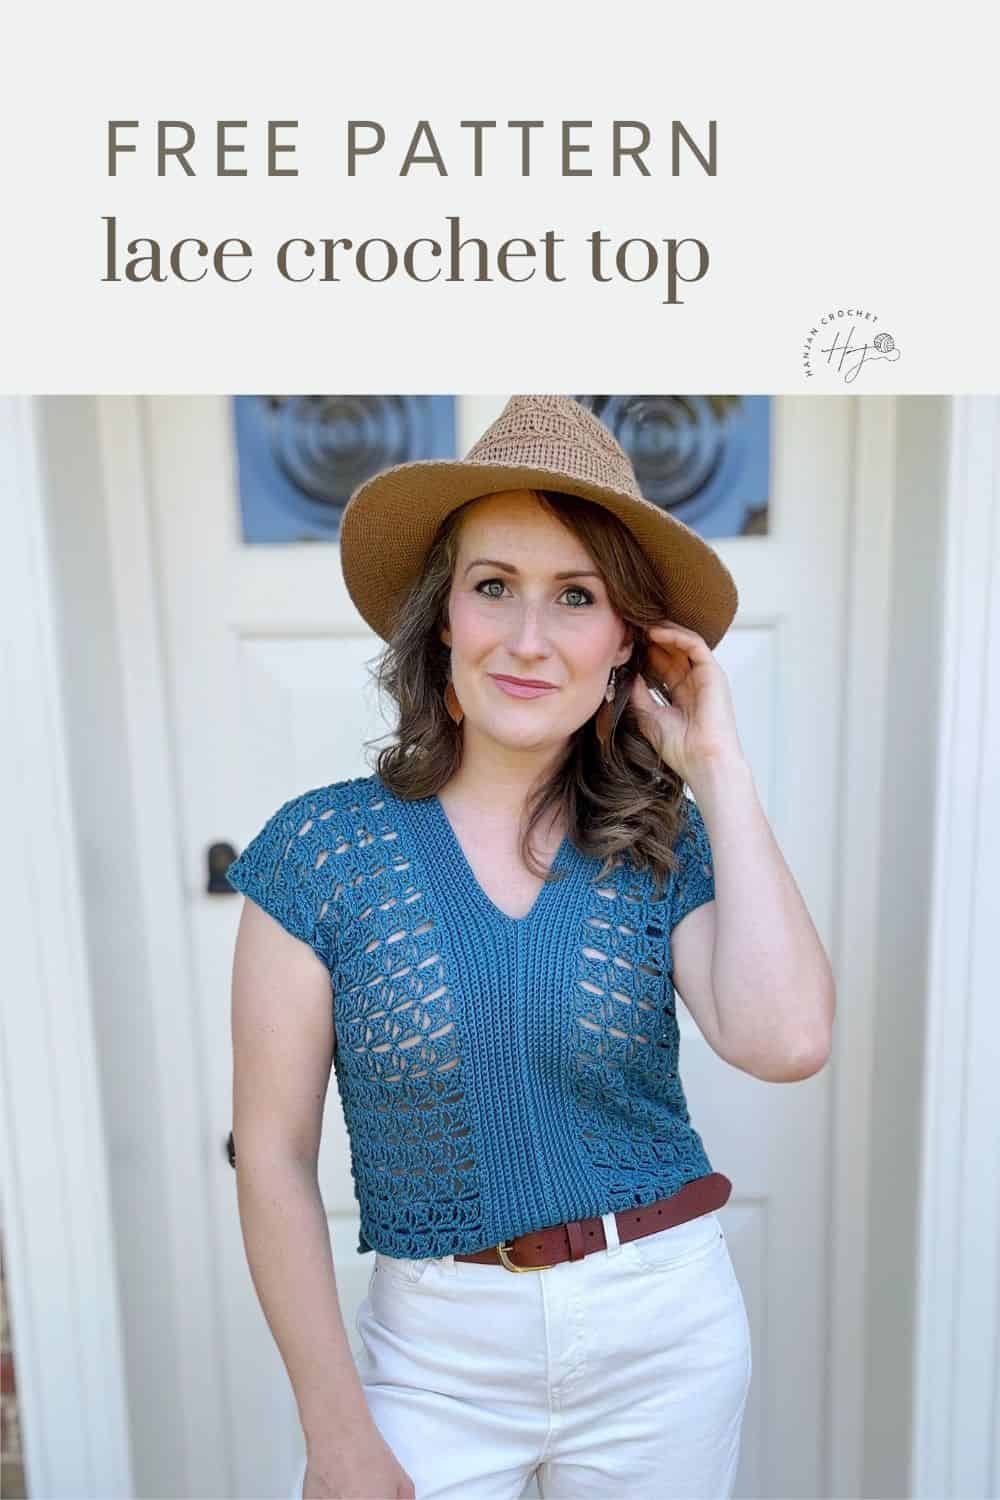 Person wearing a blue lace crochet top, white pants, and a brown hat while standing in front of a white door. Above, text reads "FREE PATTERN lace crochet top”.